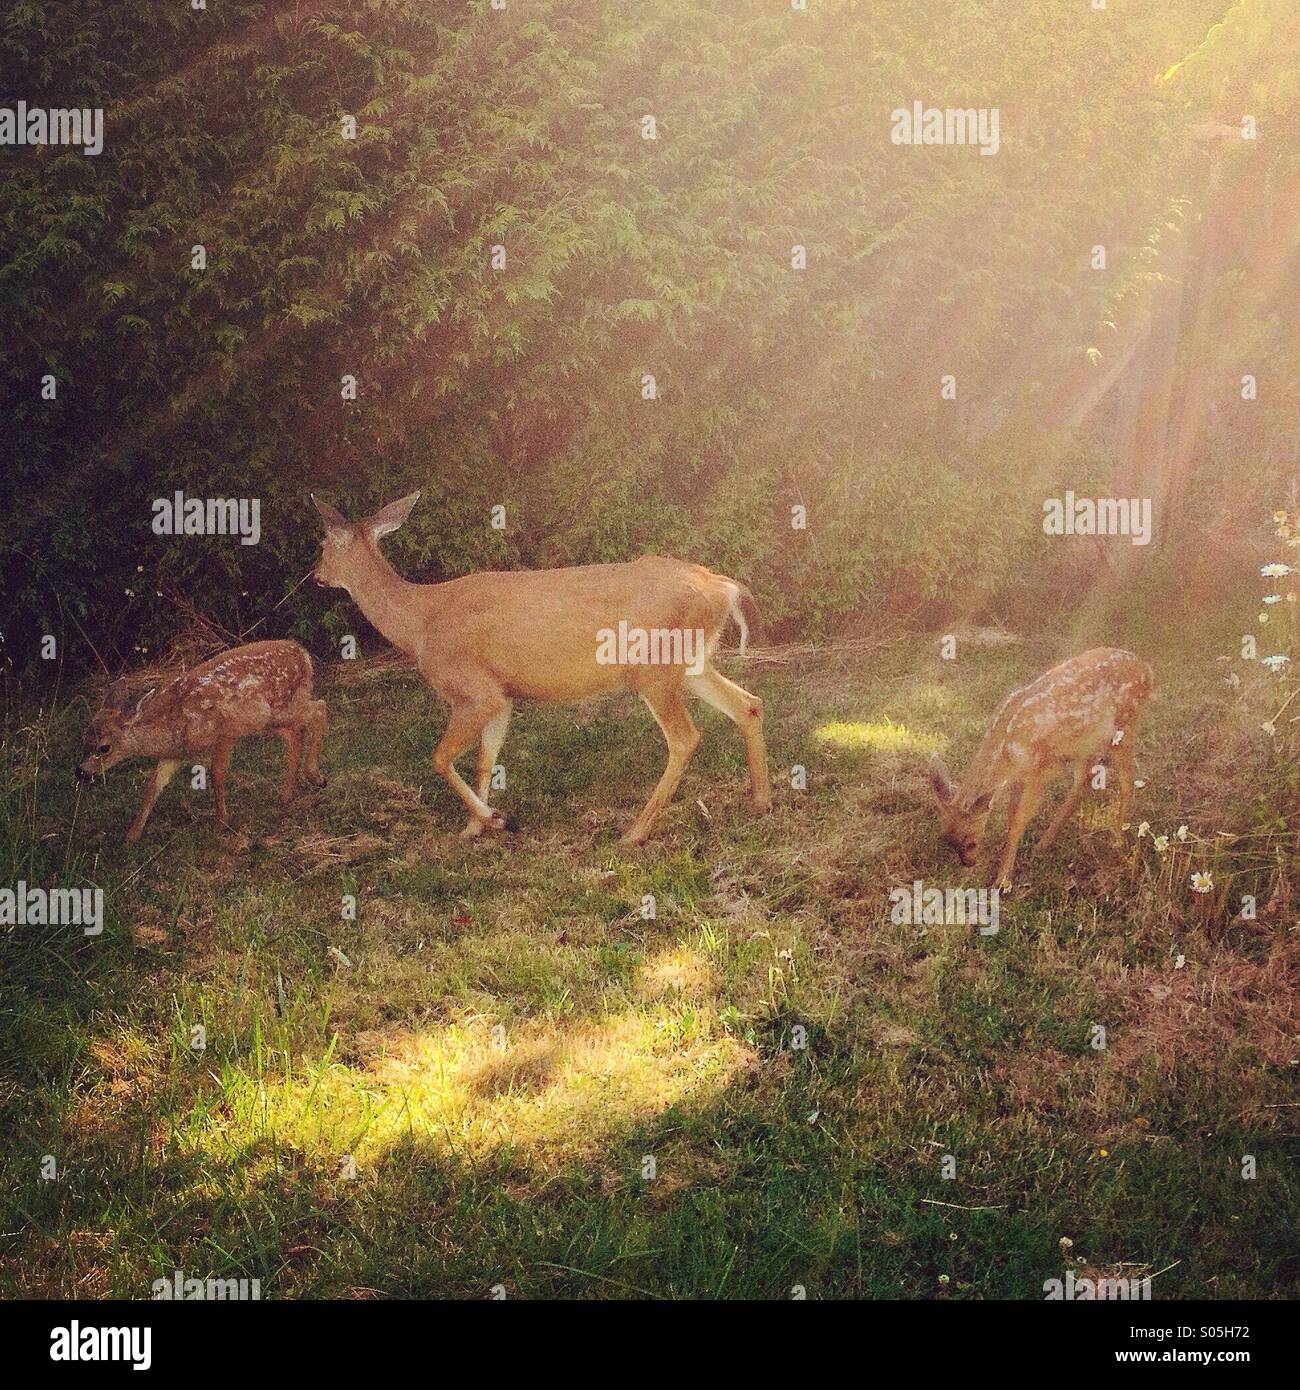 Whitetail doe deer and two cute fawns in grass with golden magical sunbeams streaming down. Stock Photo